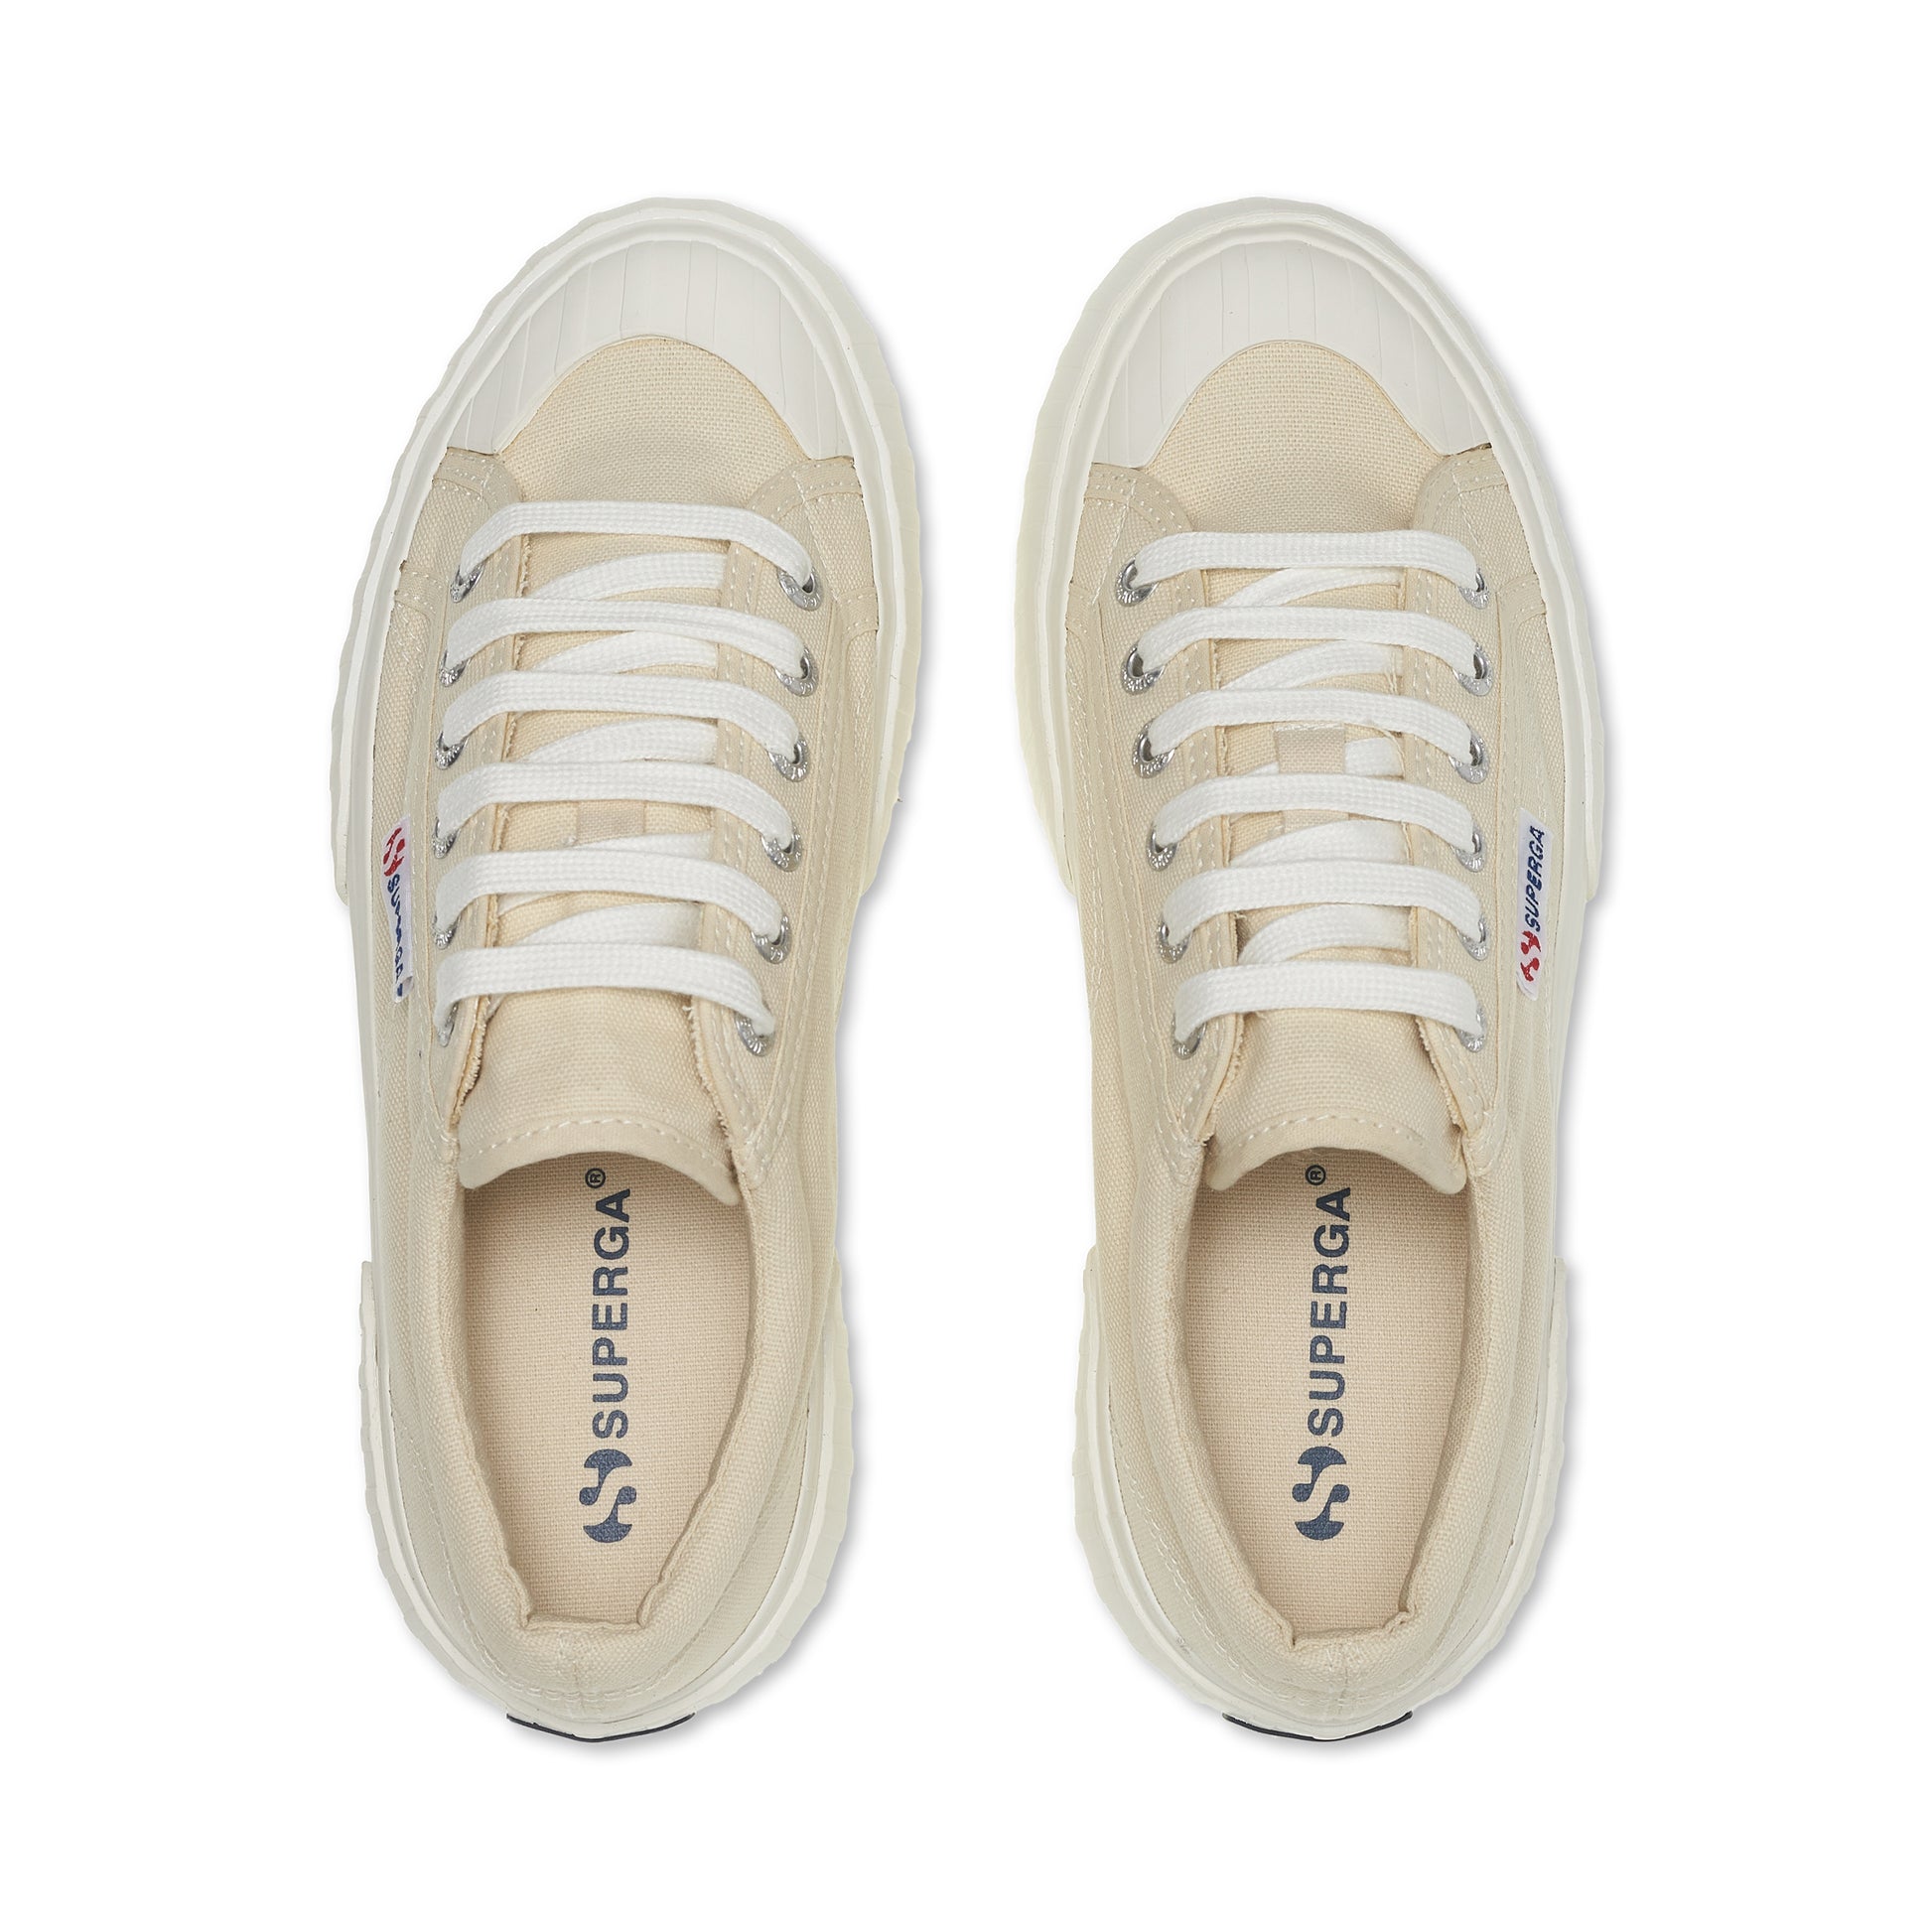 pair of cream canvas Superga sneakers with white platform outer sole top view